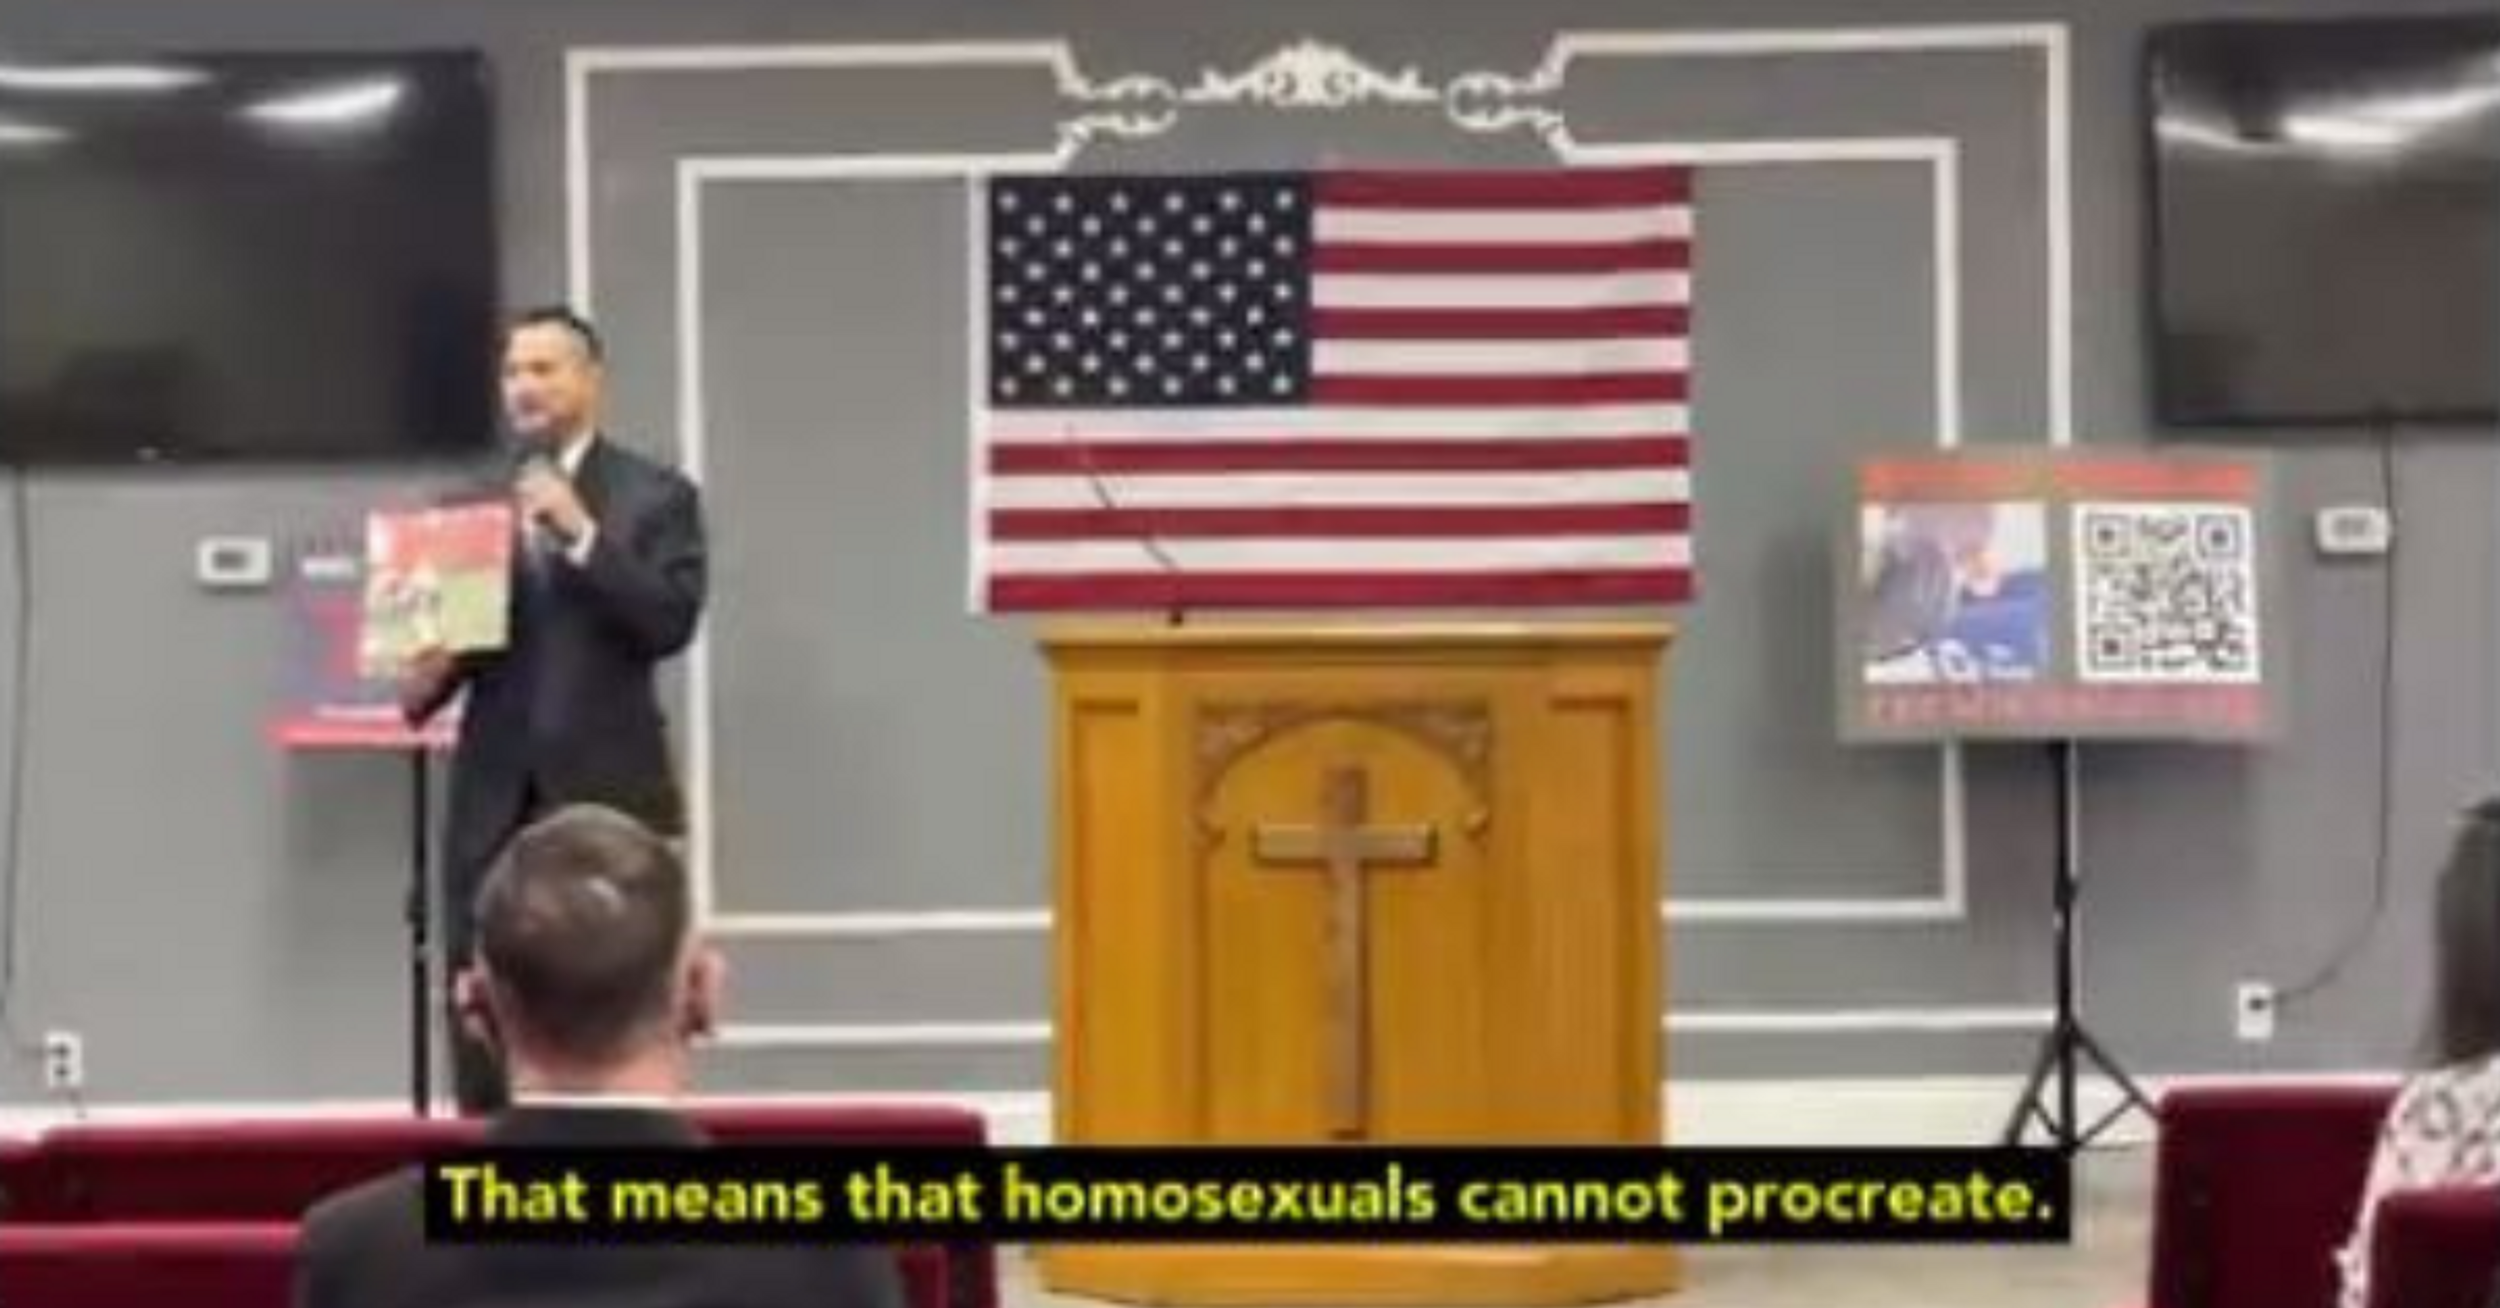 GOP Candidate Claims Gay People Go 'Against Our Constitution' Because They 'Can't Procreate' In Unhinged Speech